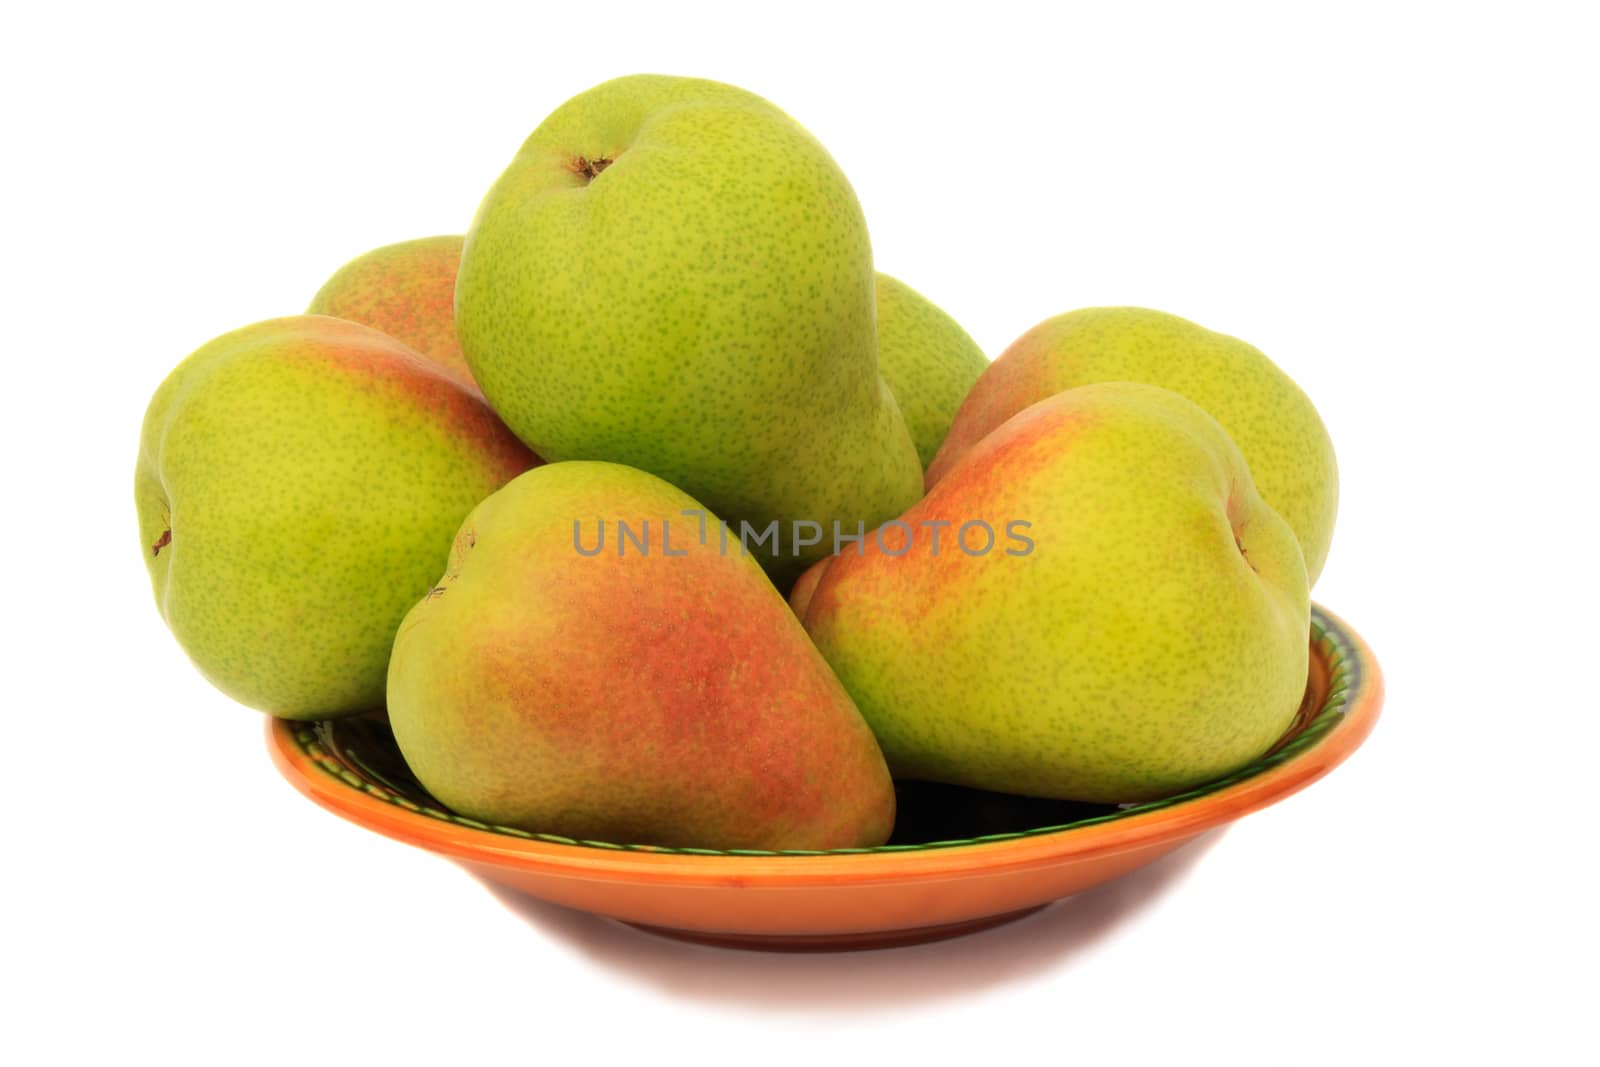 Large ripe yellow pears on a ceramic plate. Presented on a white background.